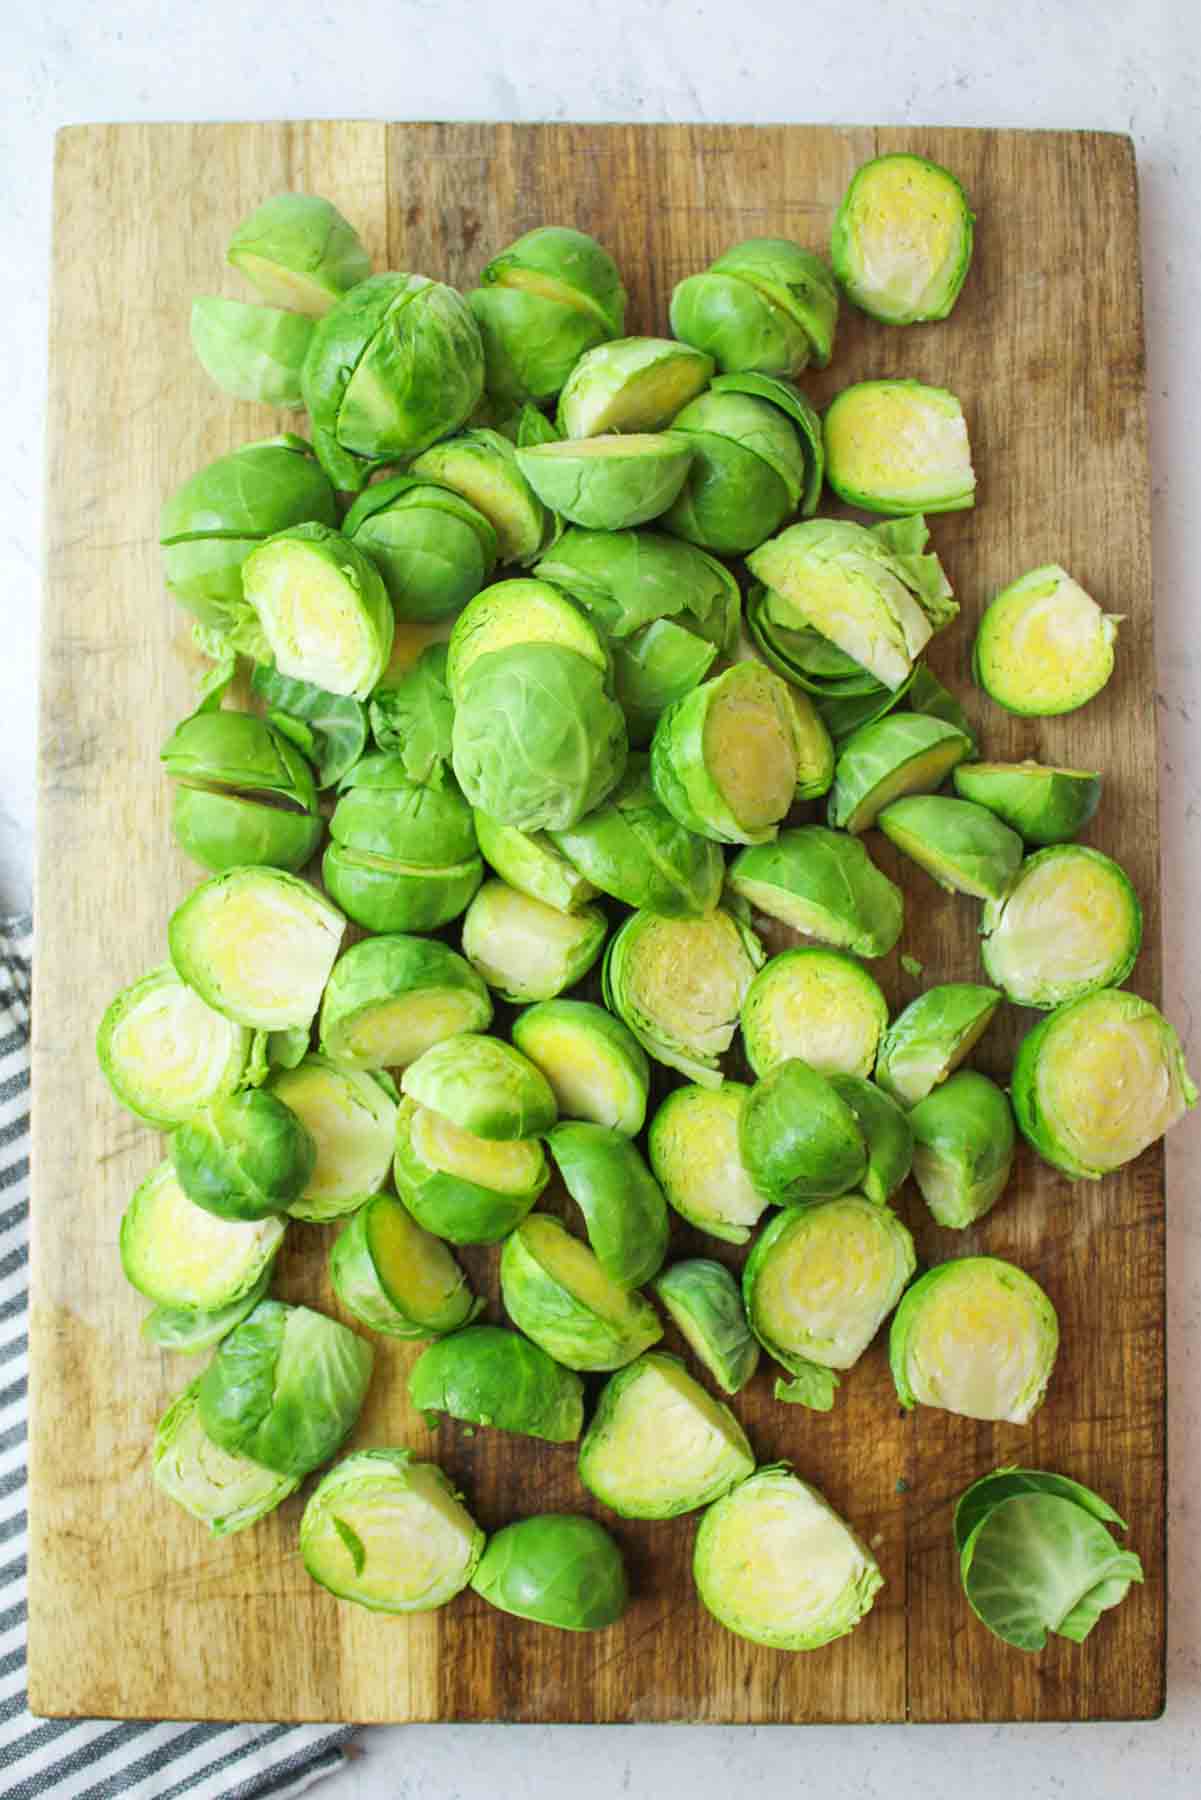 halved brussel sprouts on a wooden cutting board